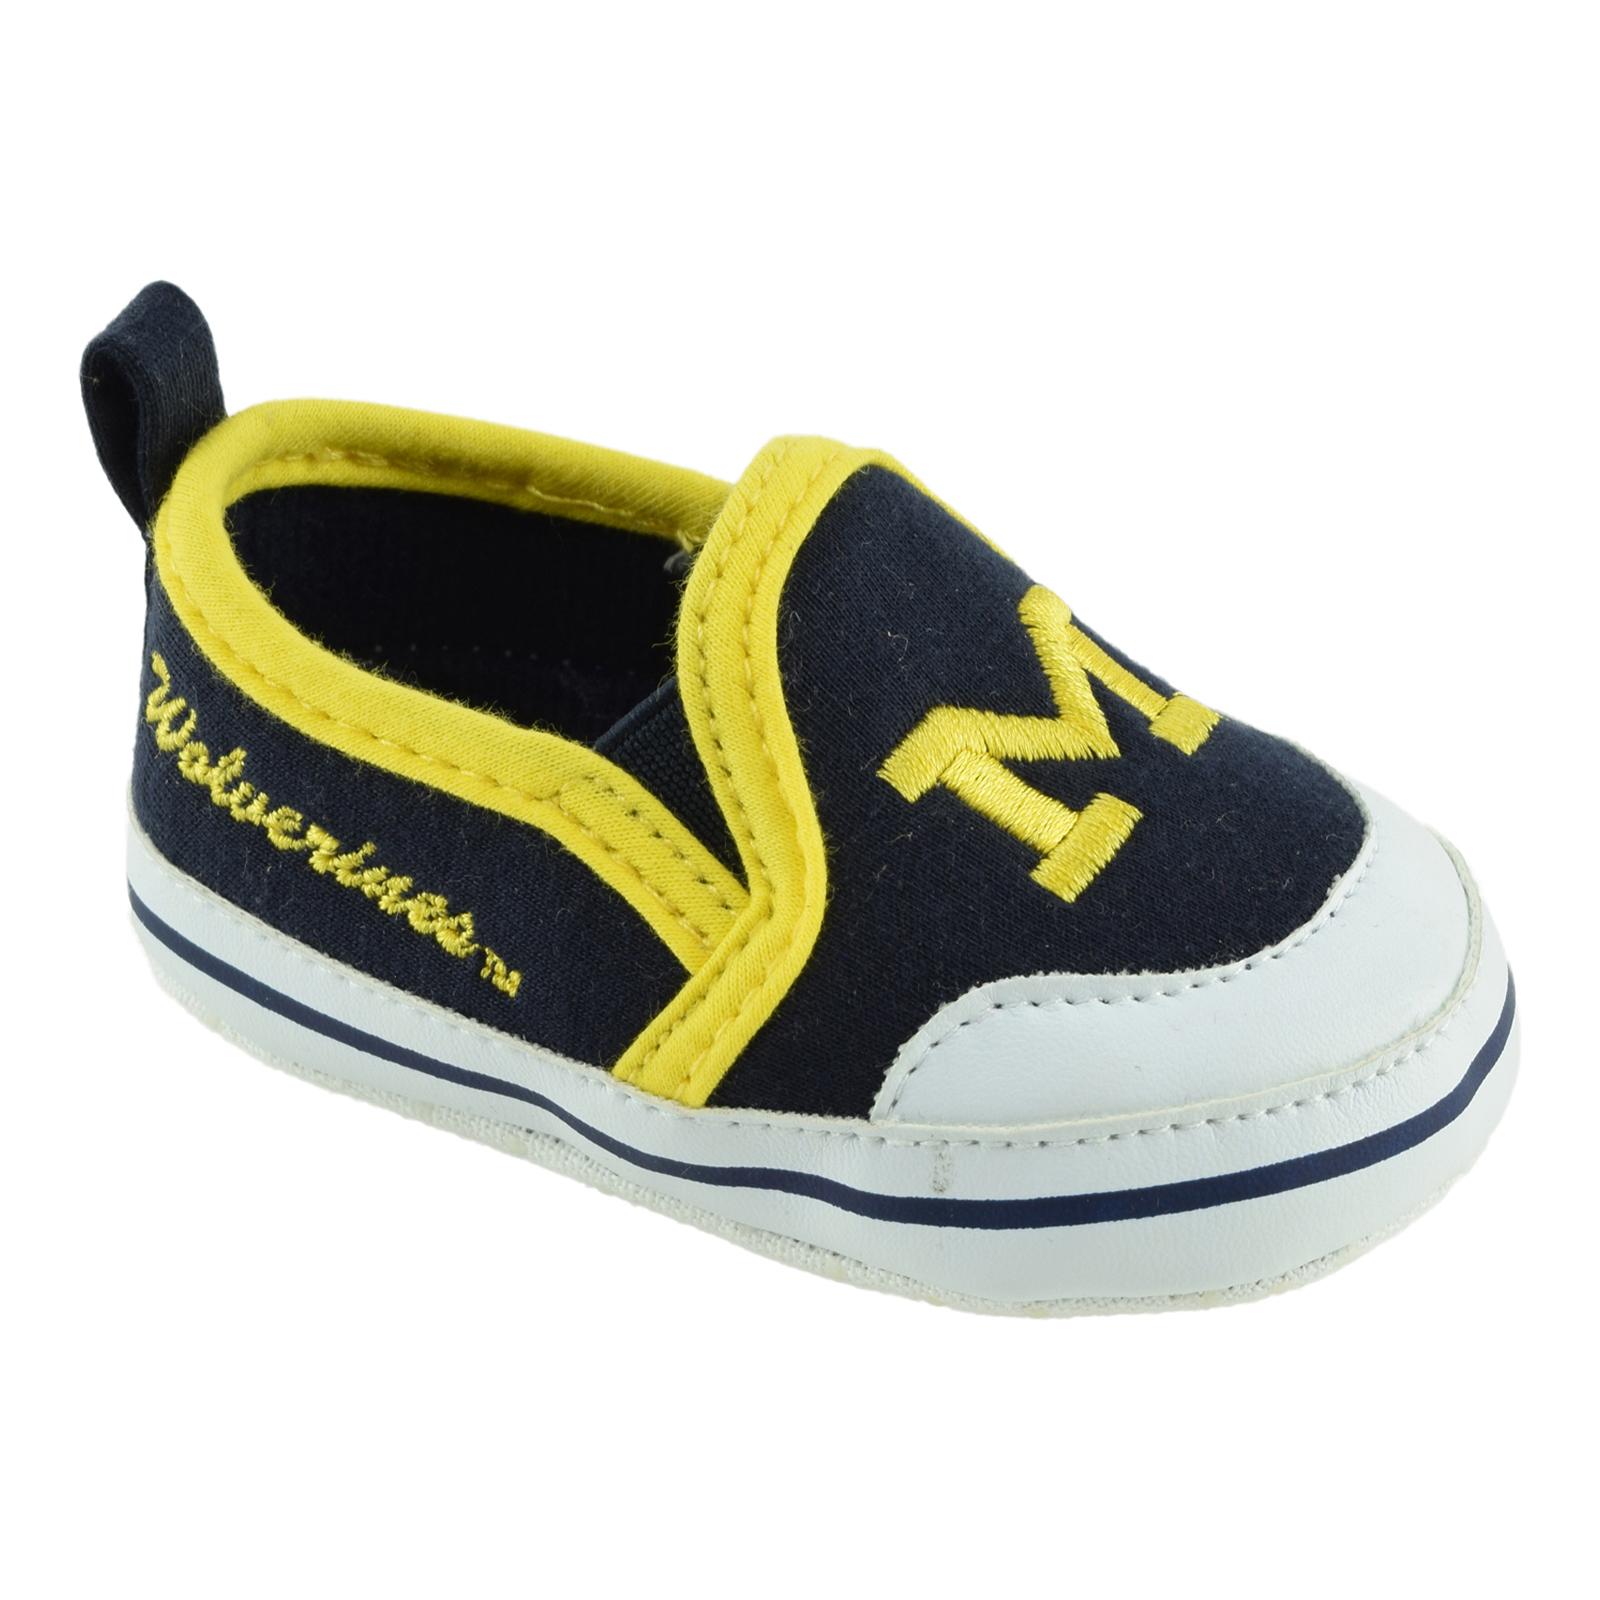 NCAA Newborn & Infant University of Michigan Wolverines Soft Sole Shoes